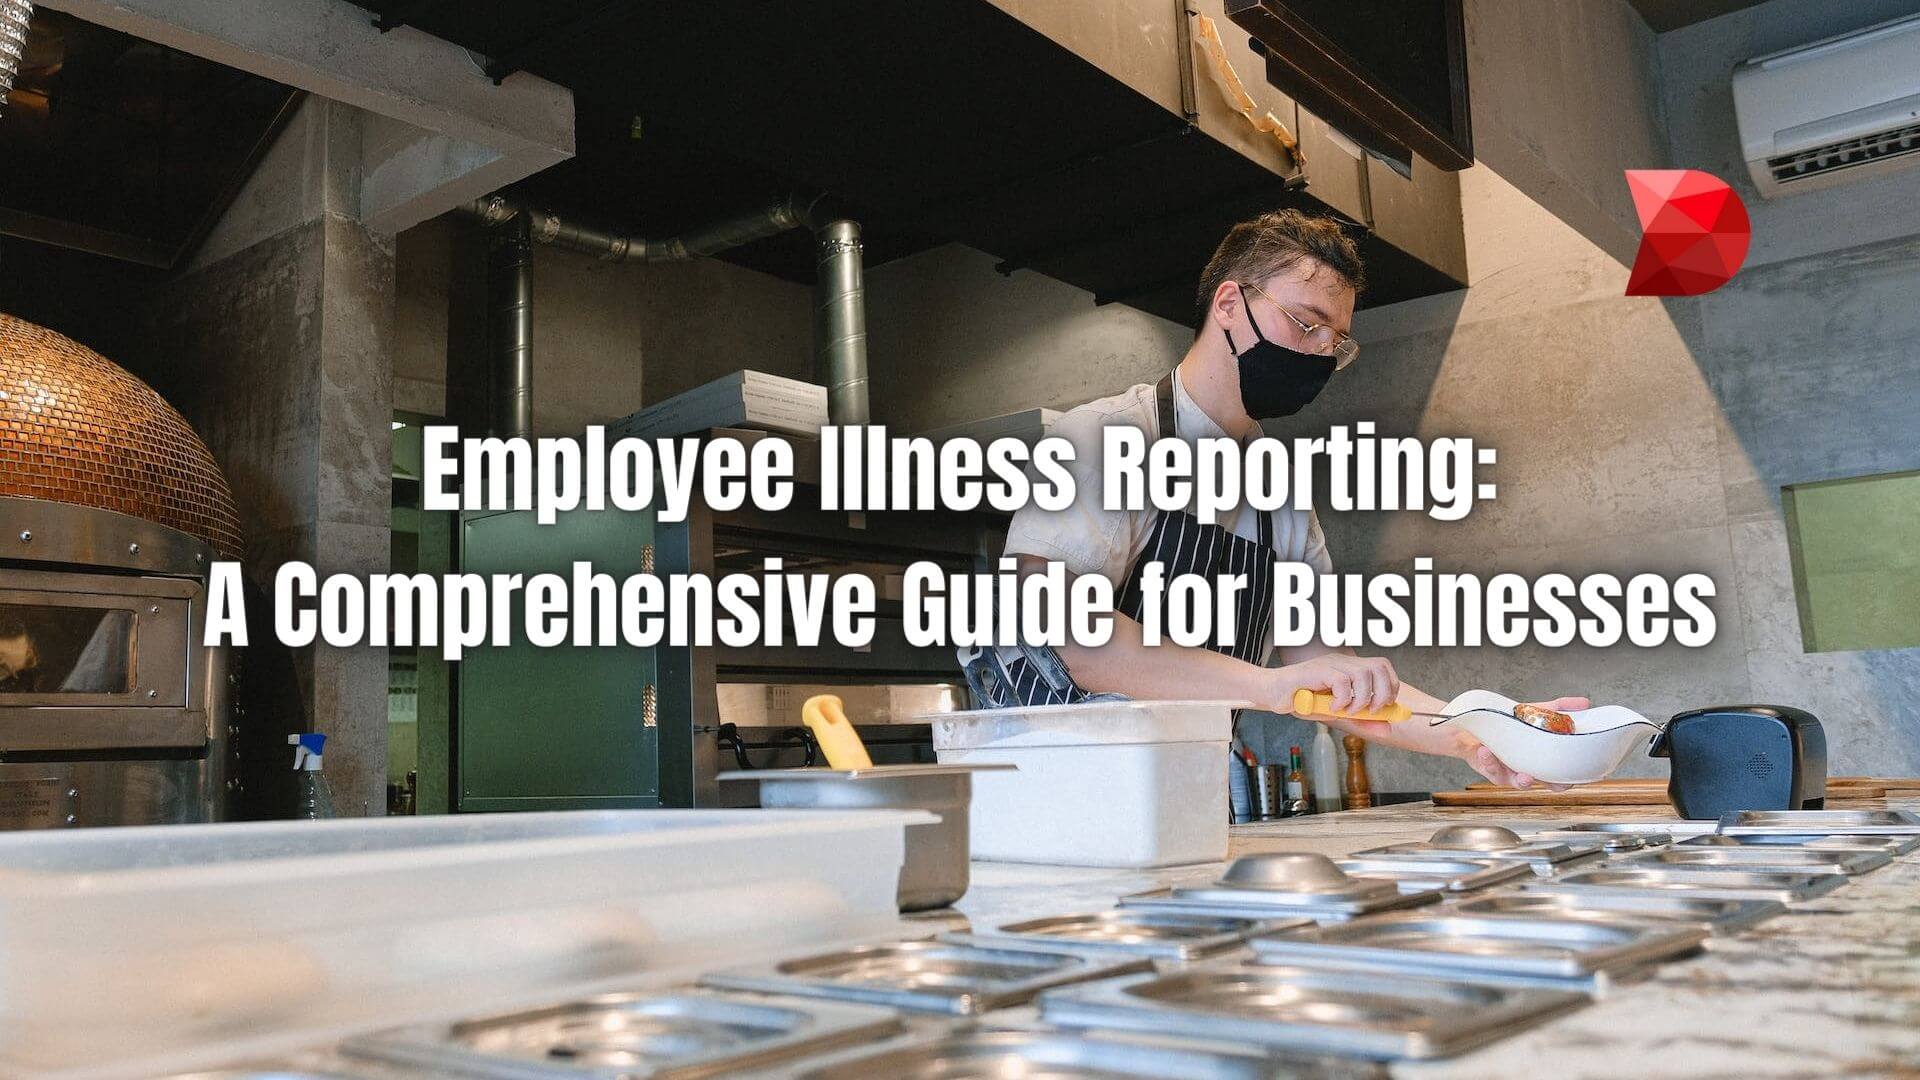 Master the art of employee illness reporting with this comprehensive guide. Click here to learn effective strategies and protocols today!